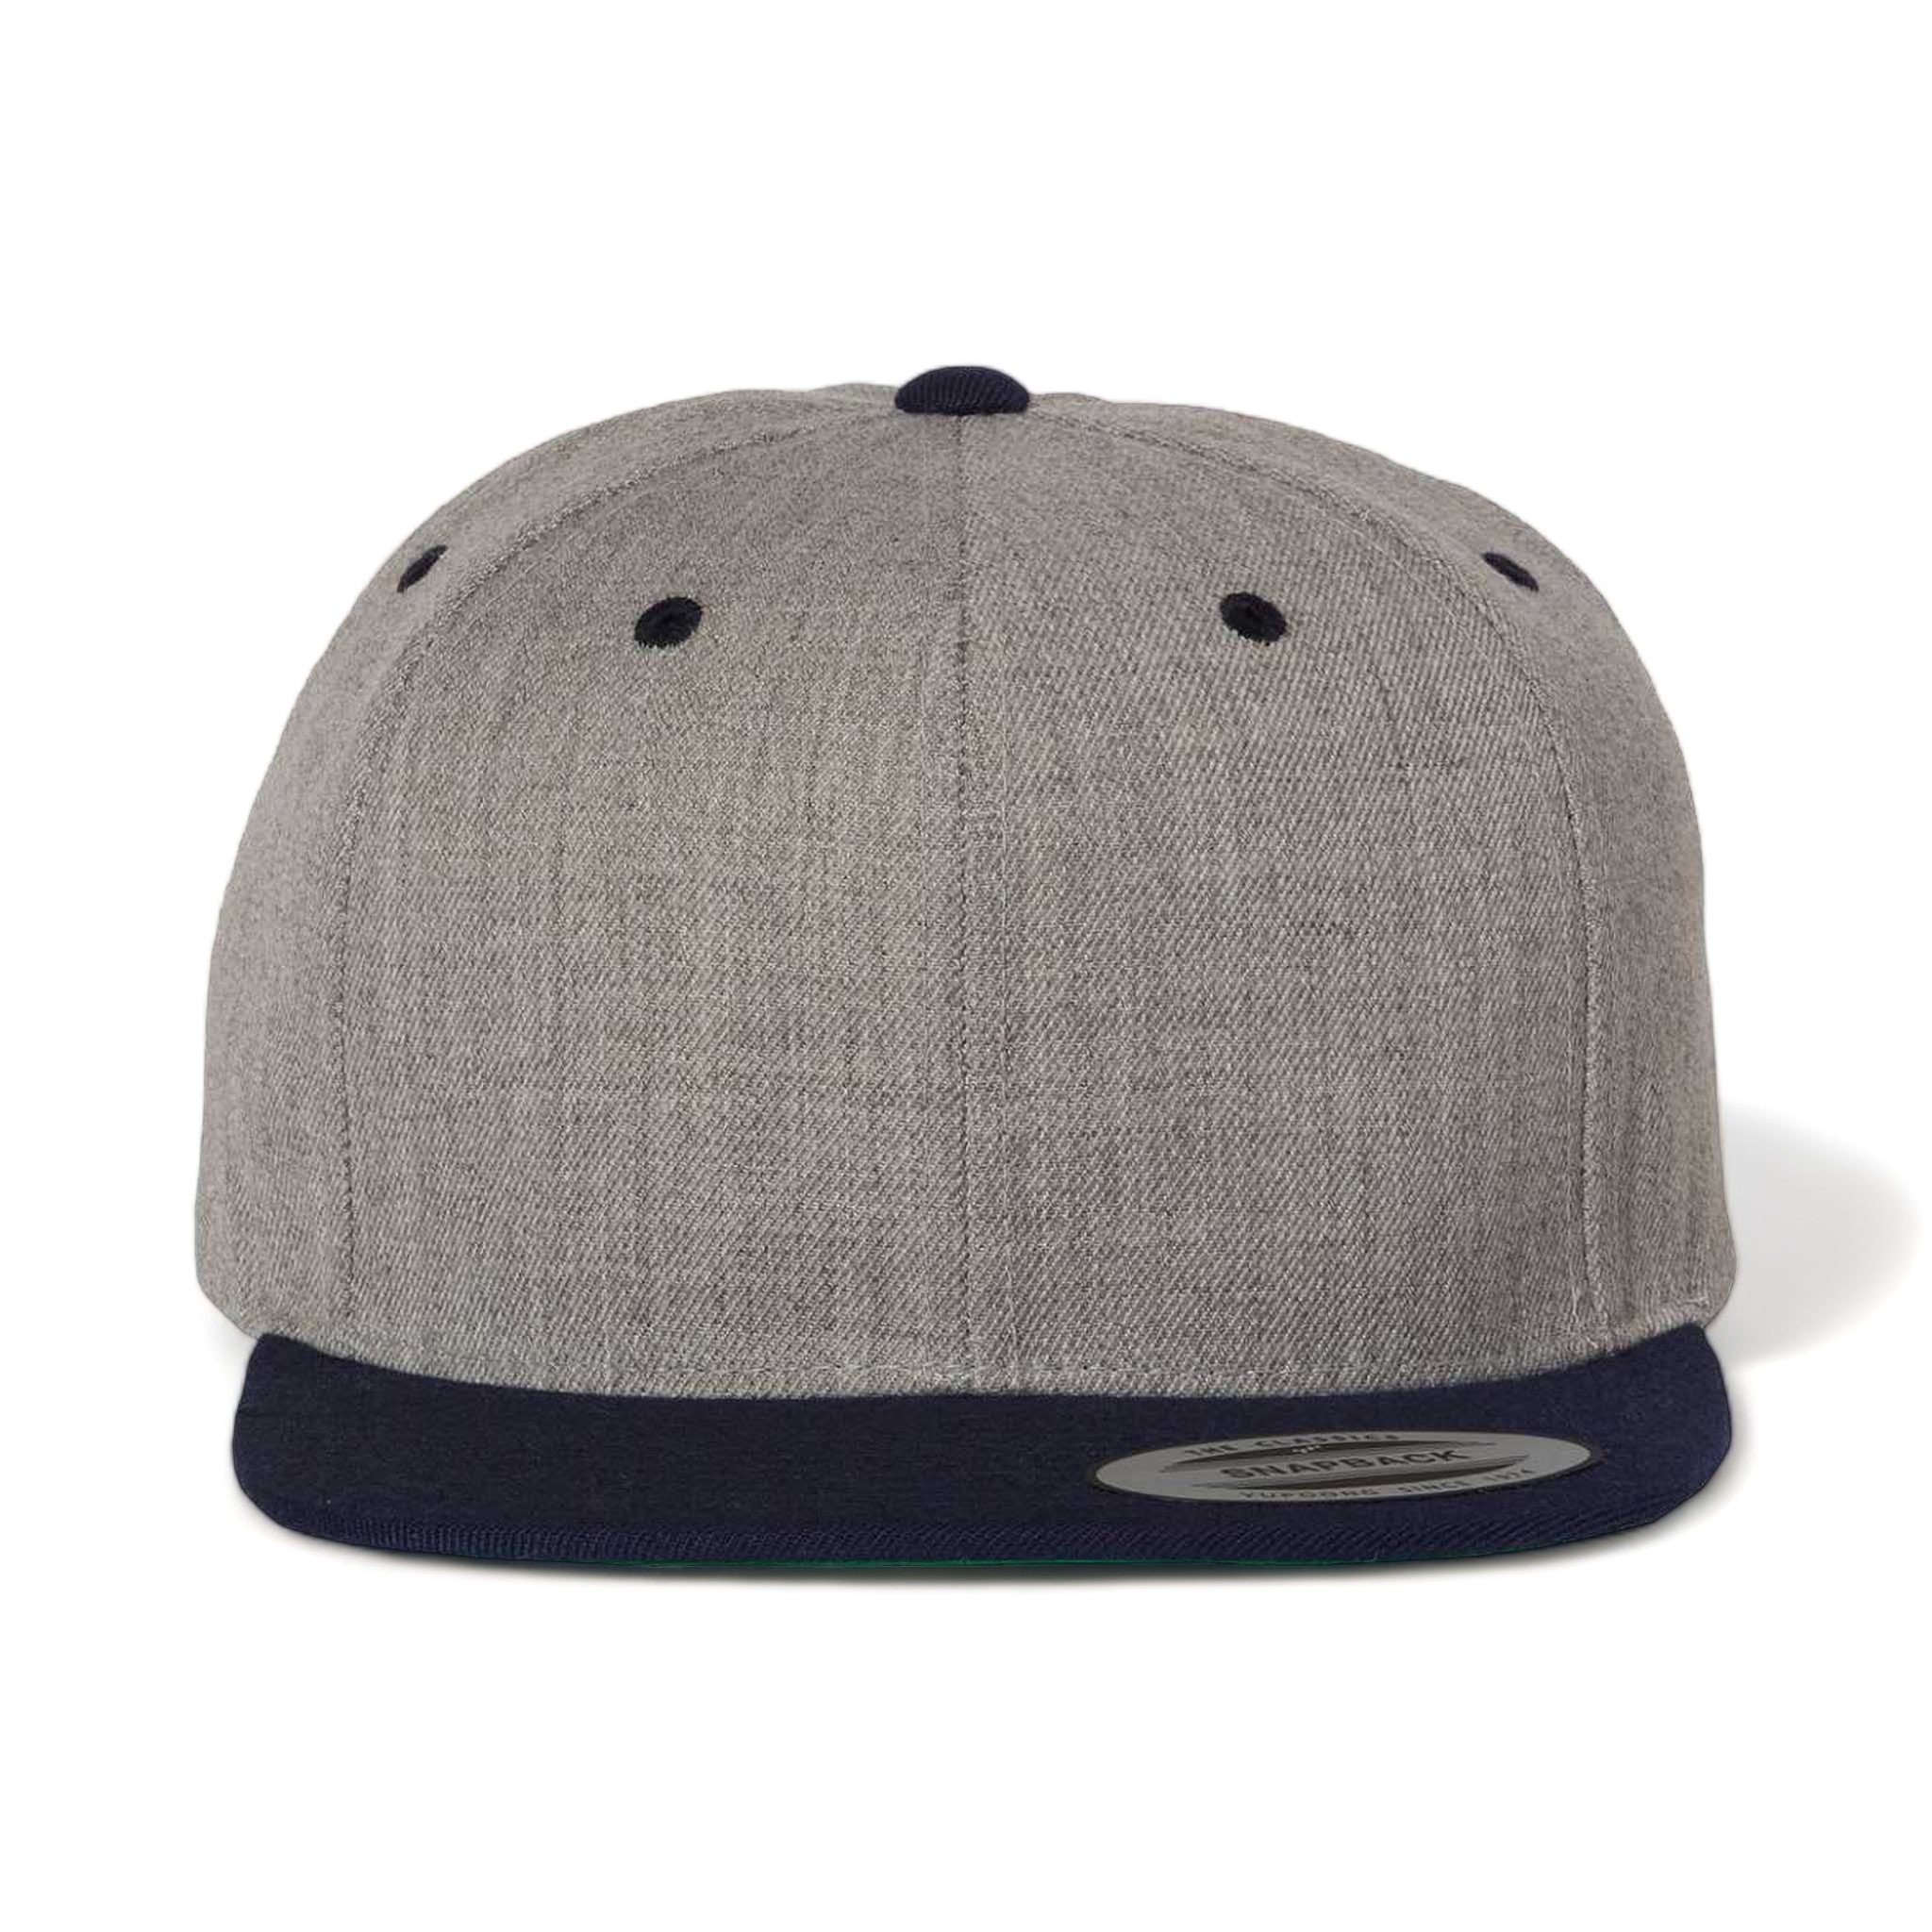 Front view of YP Classics 6089M custom hat in heather grey and navy